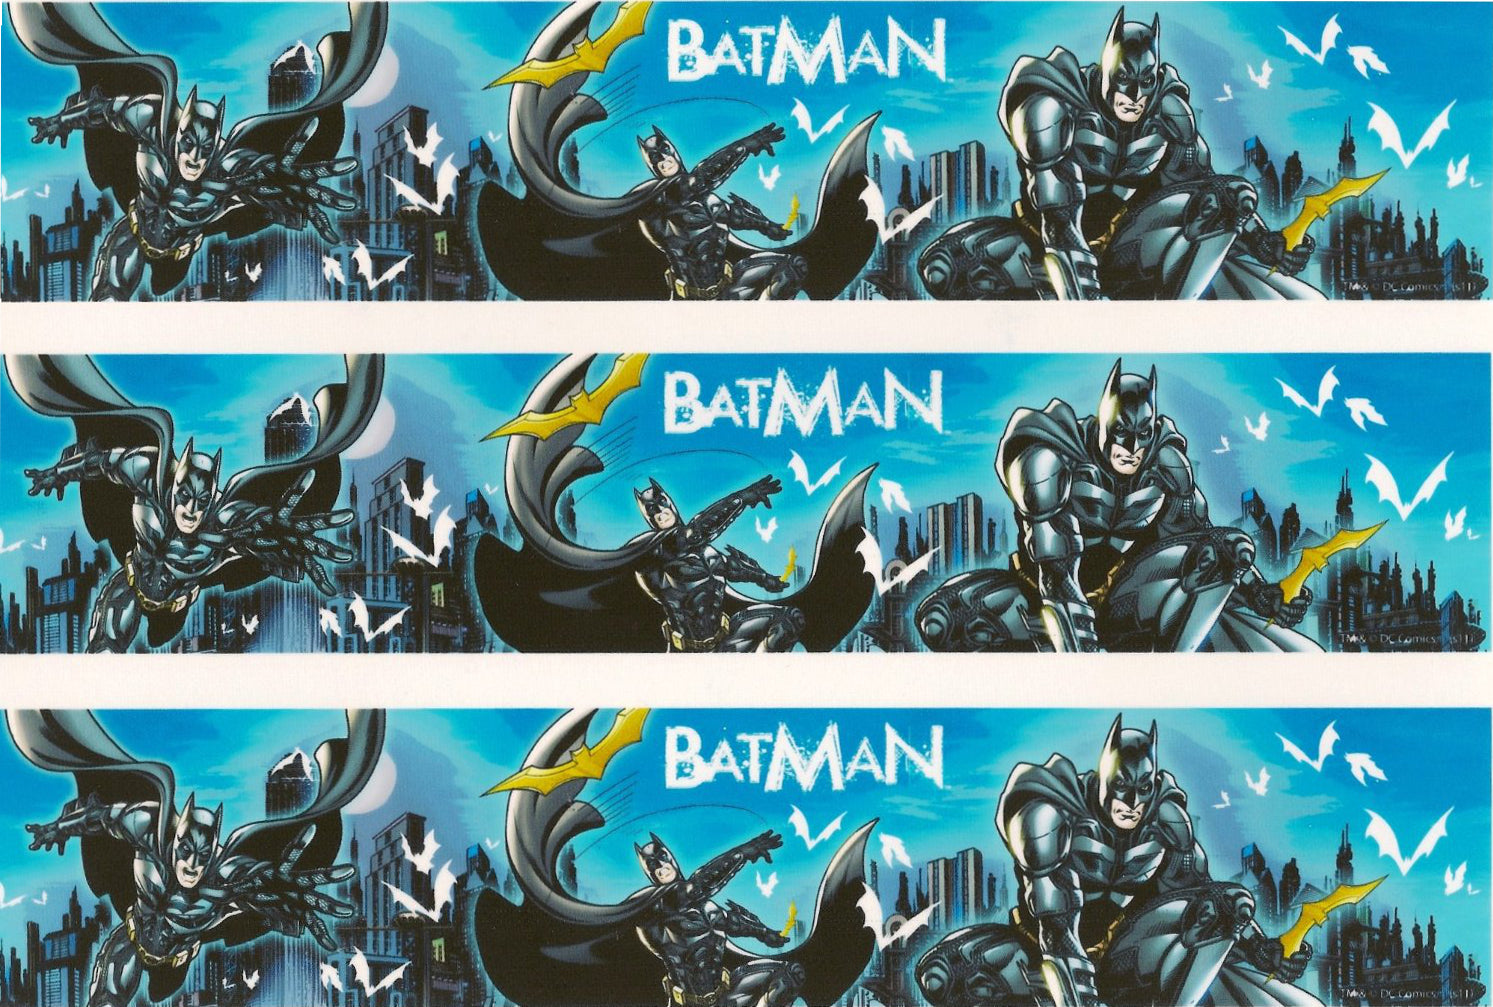 DC Comics Batman Flying Over Gotham City Edible Cake Topper Image Strips ABPID08116